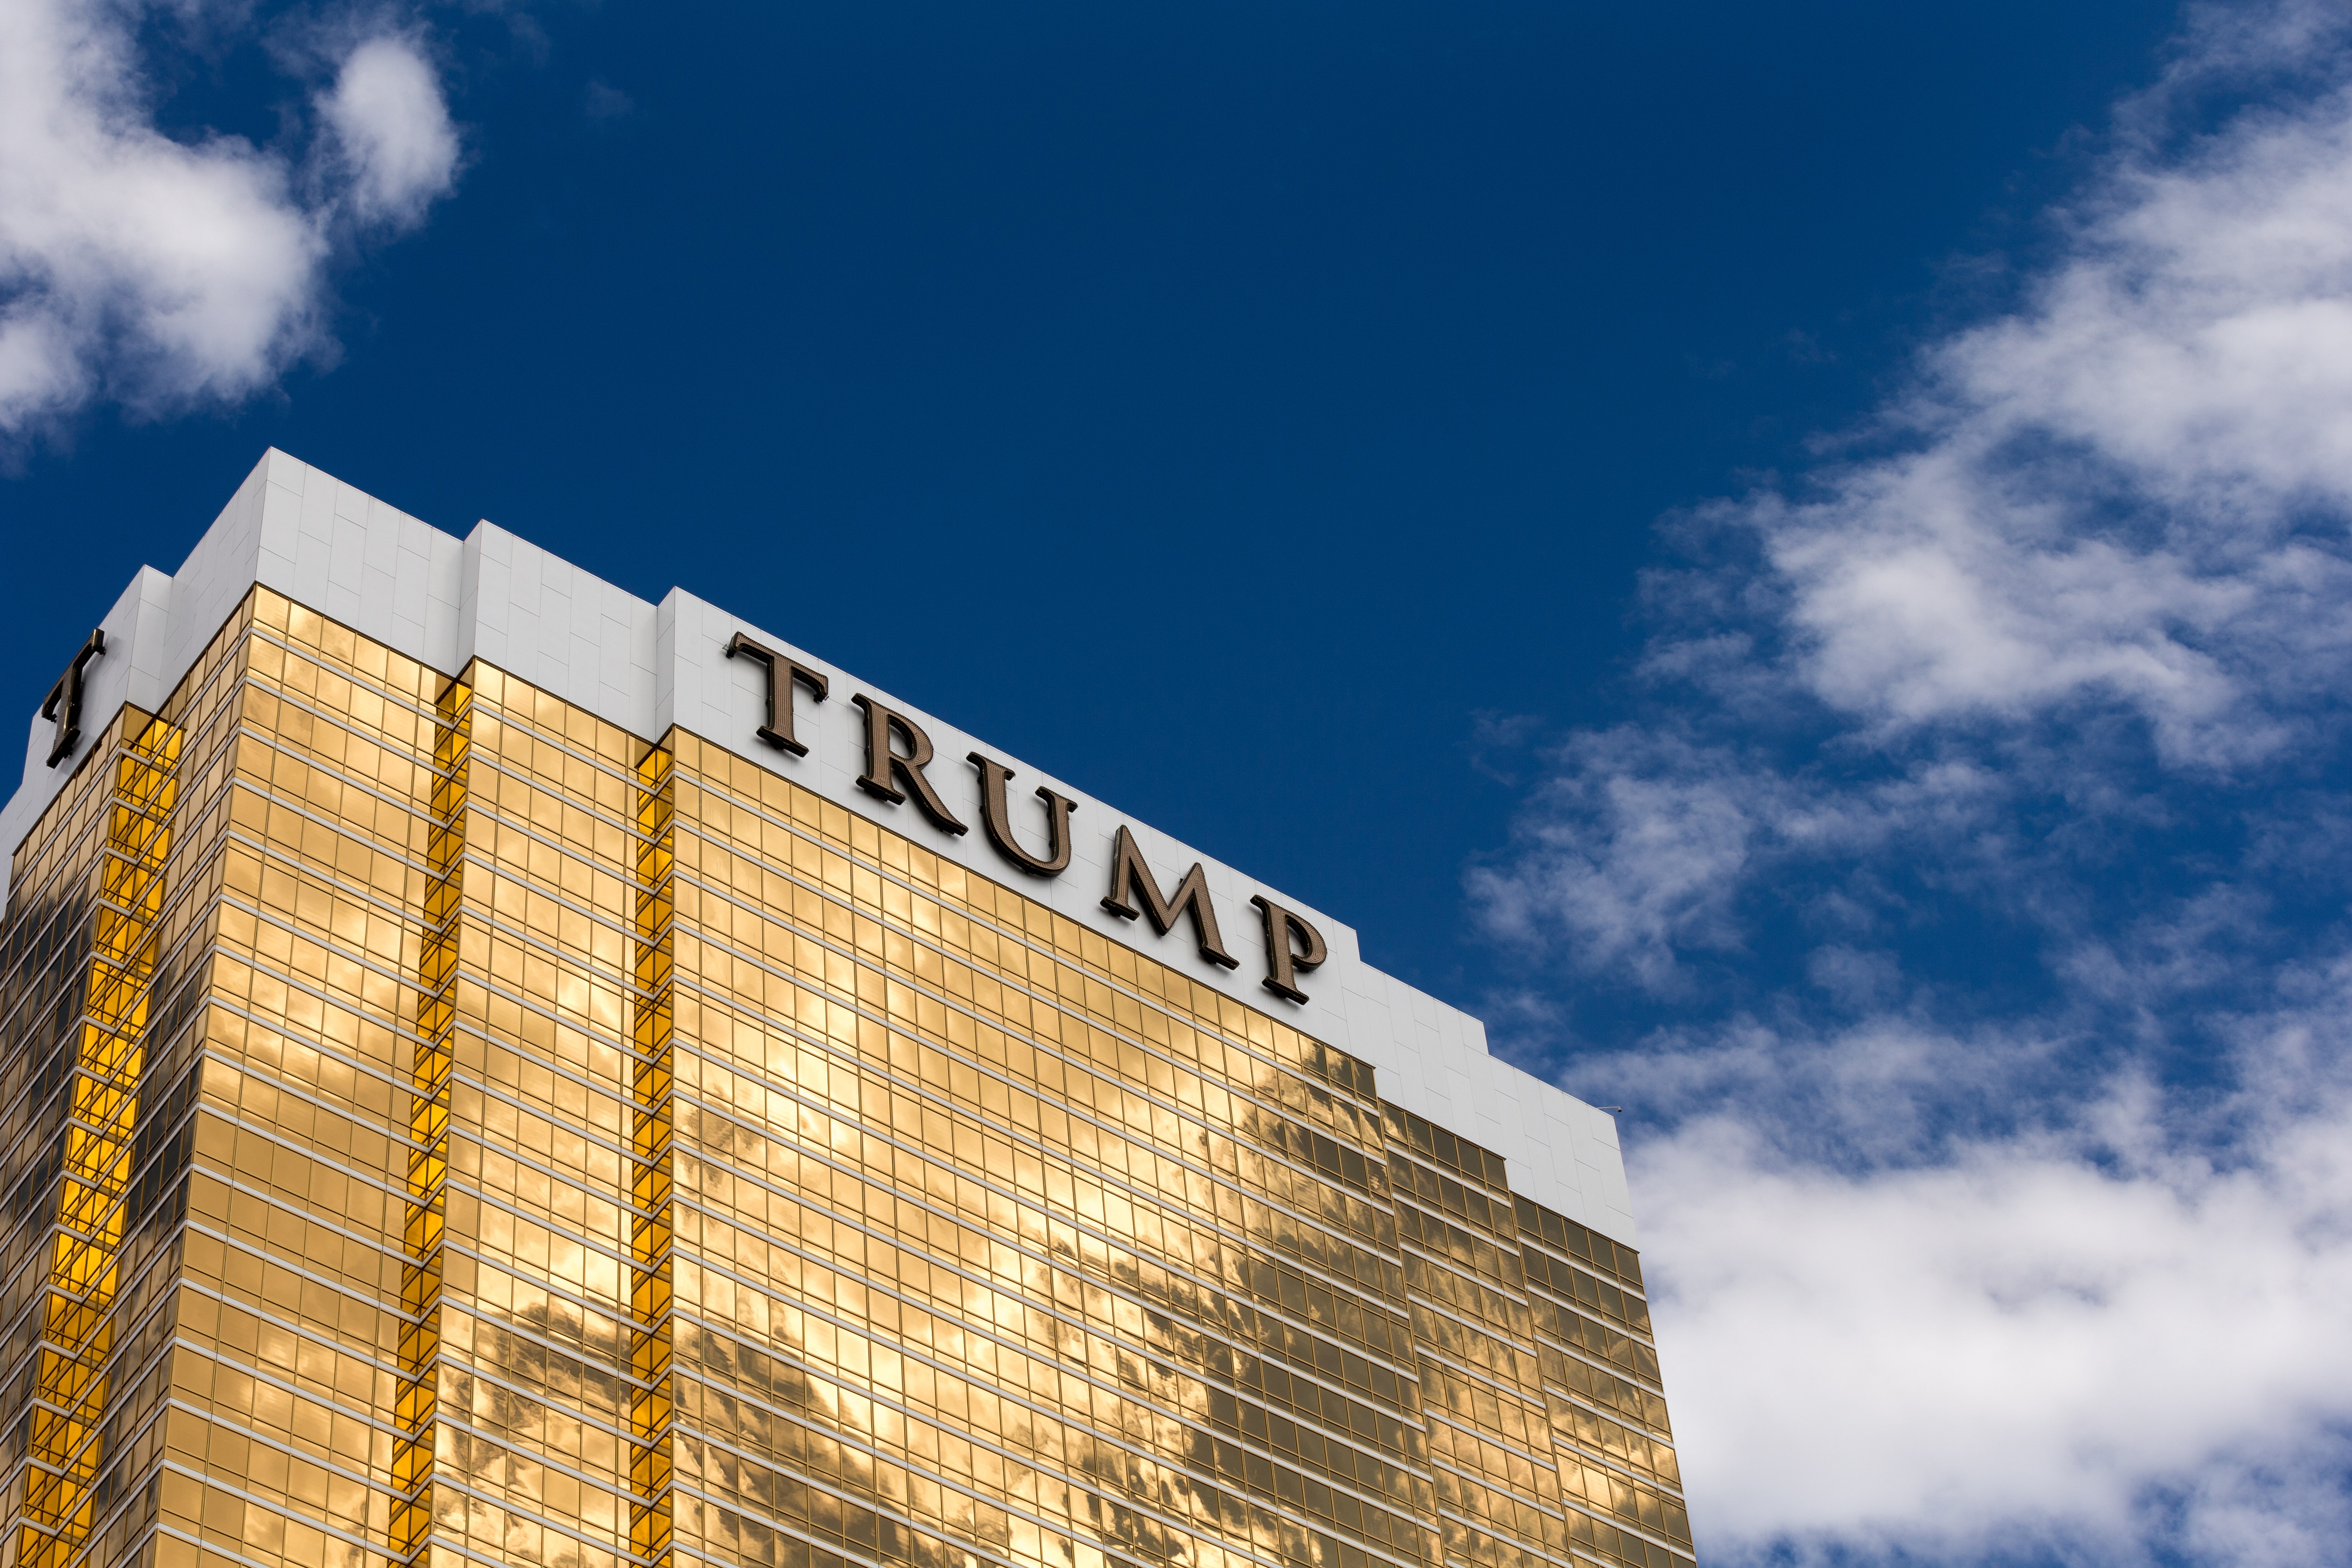 Trump's Hotels Turned Secret Service Into 'Captive Customer' With $1.4M Bill And Sky-High Room Rates, Records Show